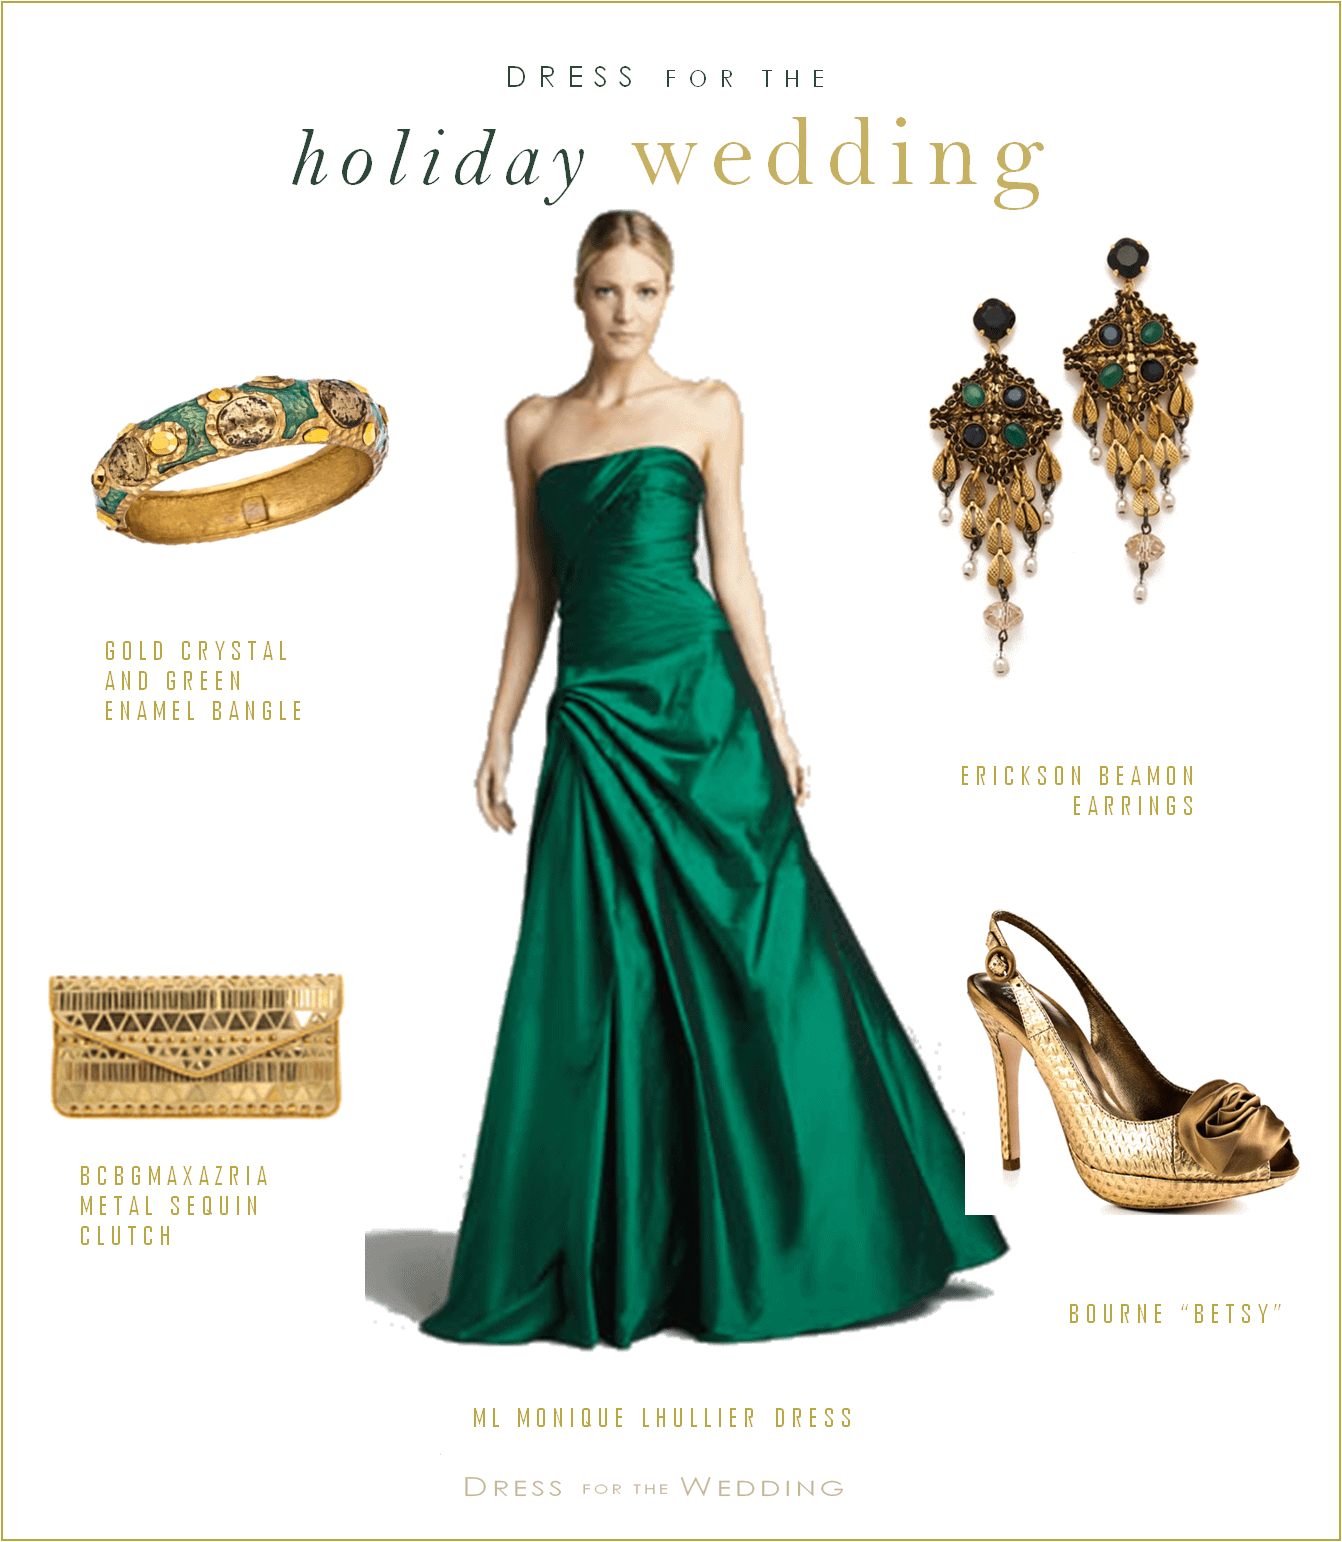 emerald green and gold heels